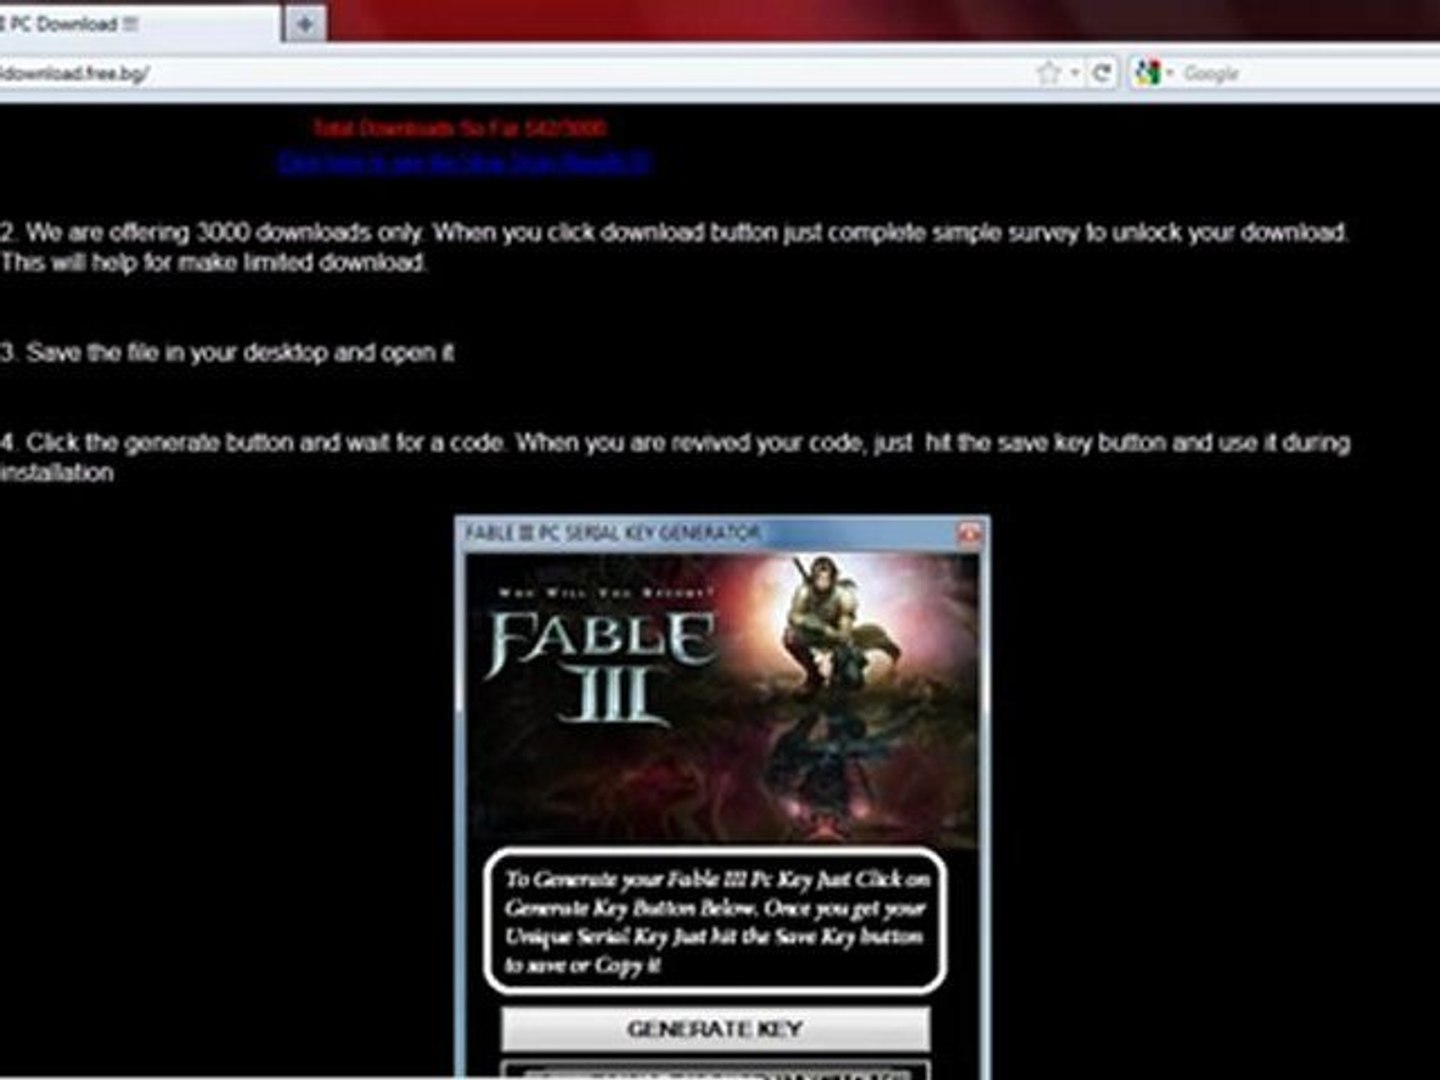 fable 3 manual activation unlock code